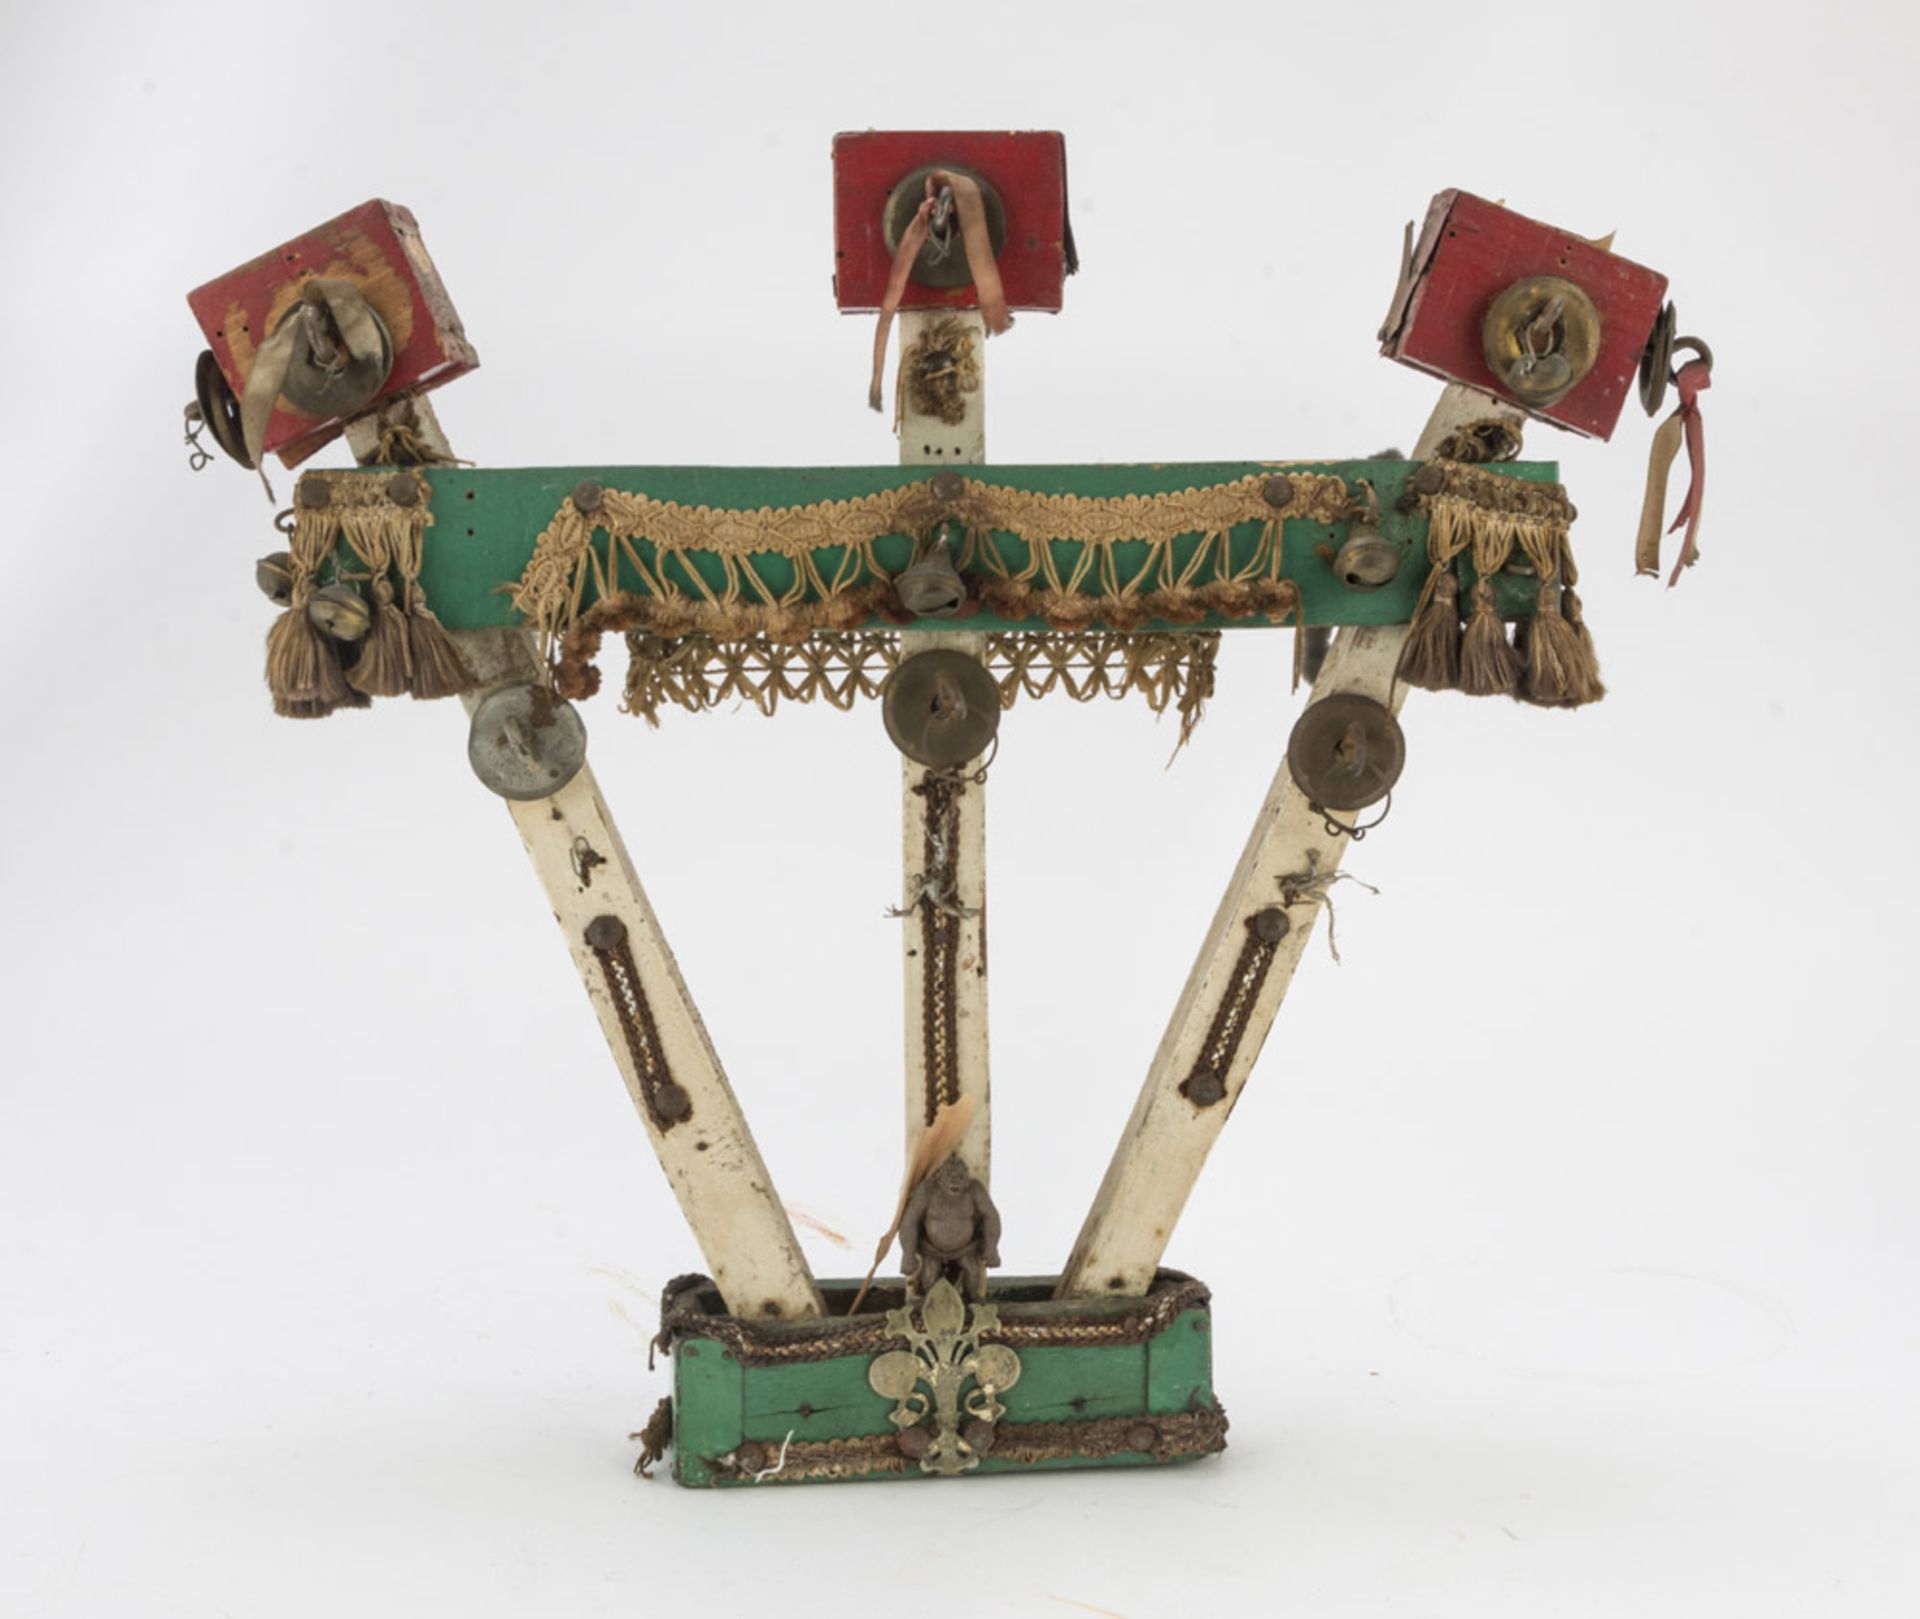 MUSICAL INSTRUMENT IN LACQUERED WOOD – SICILY LATE 19TH CENTURY